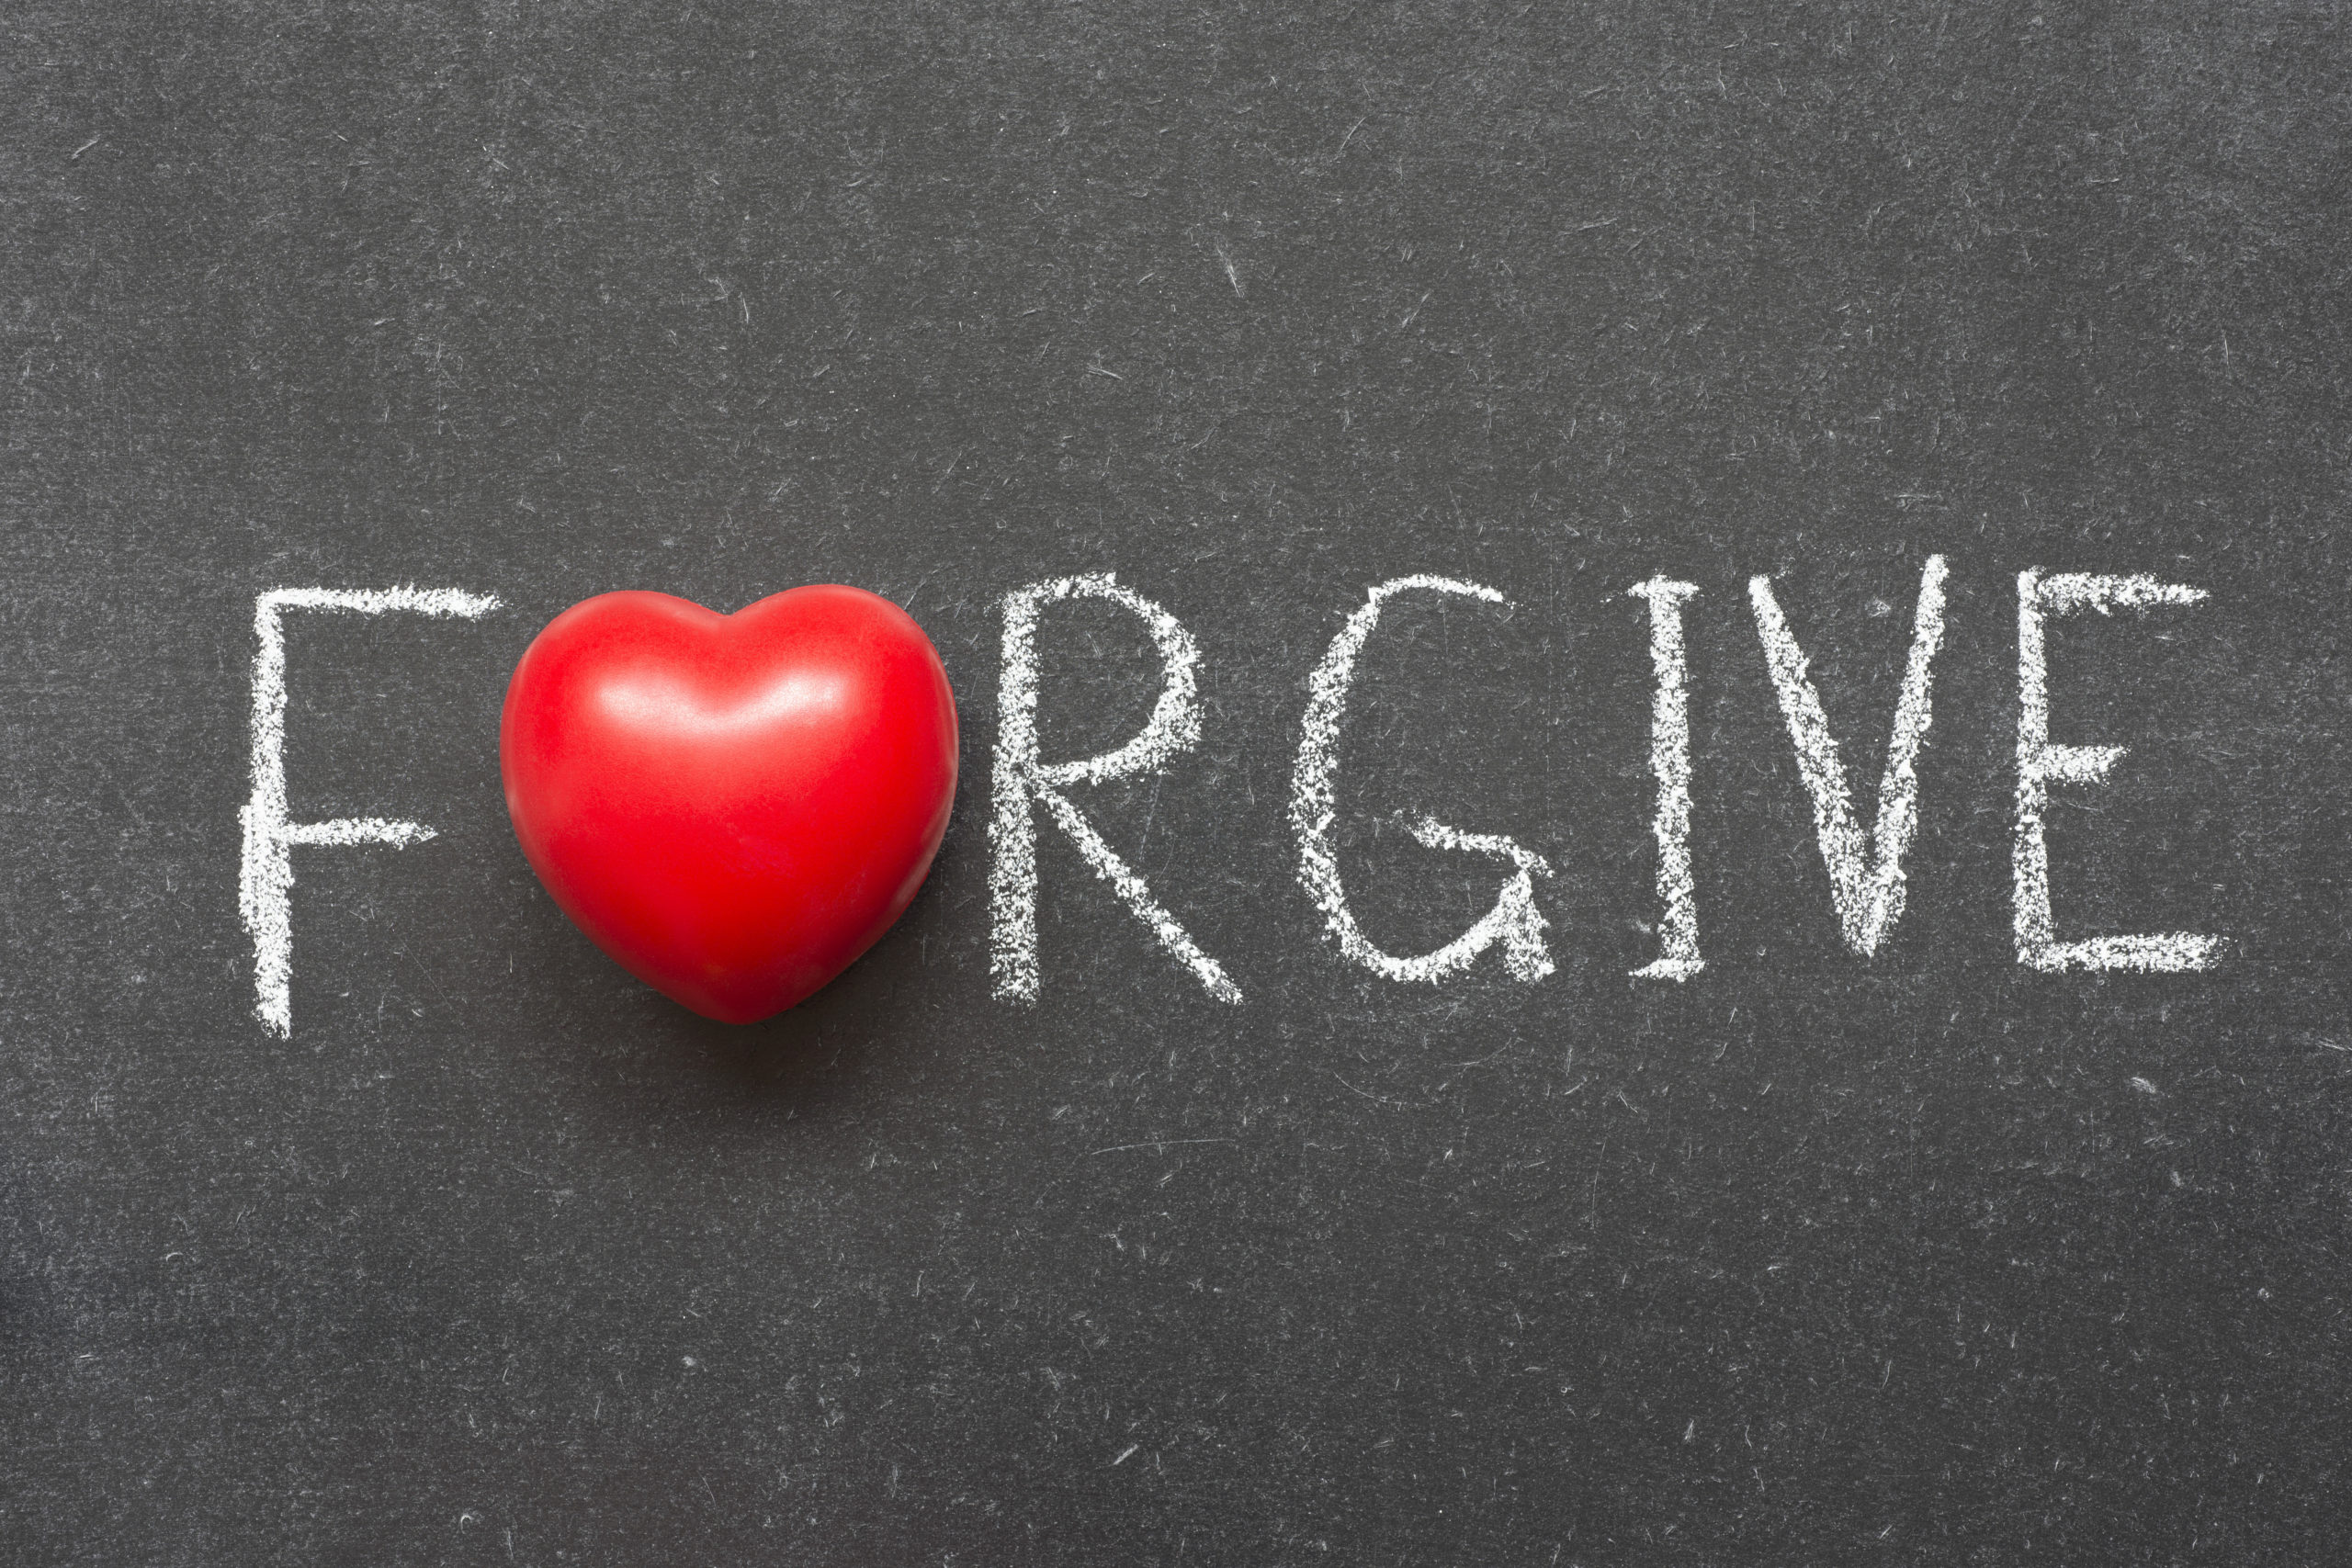 Forgive,Word,Handwritten,On,Chalkboard,With,Heart,Symbol,Instead,Of